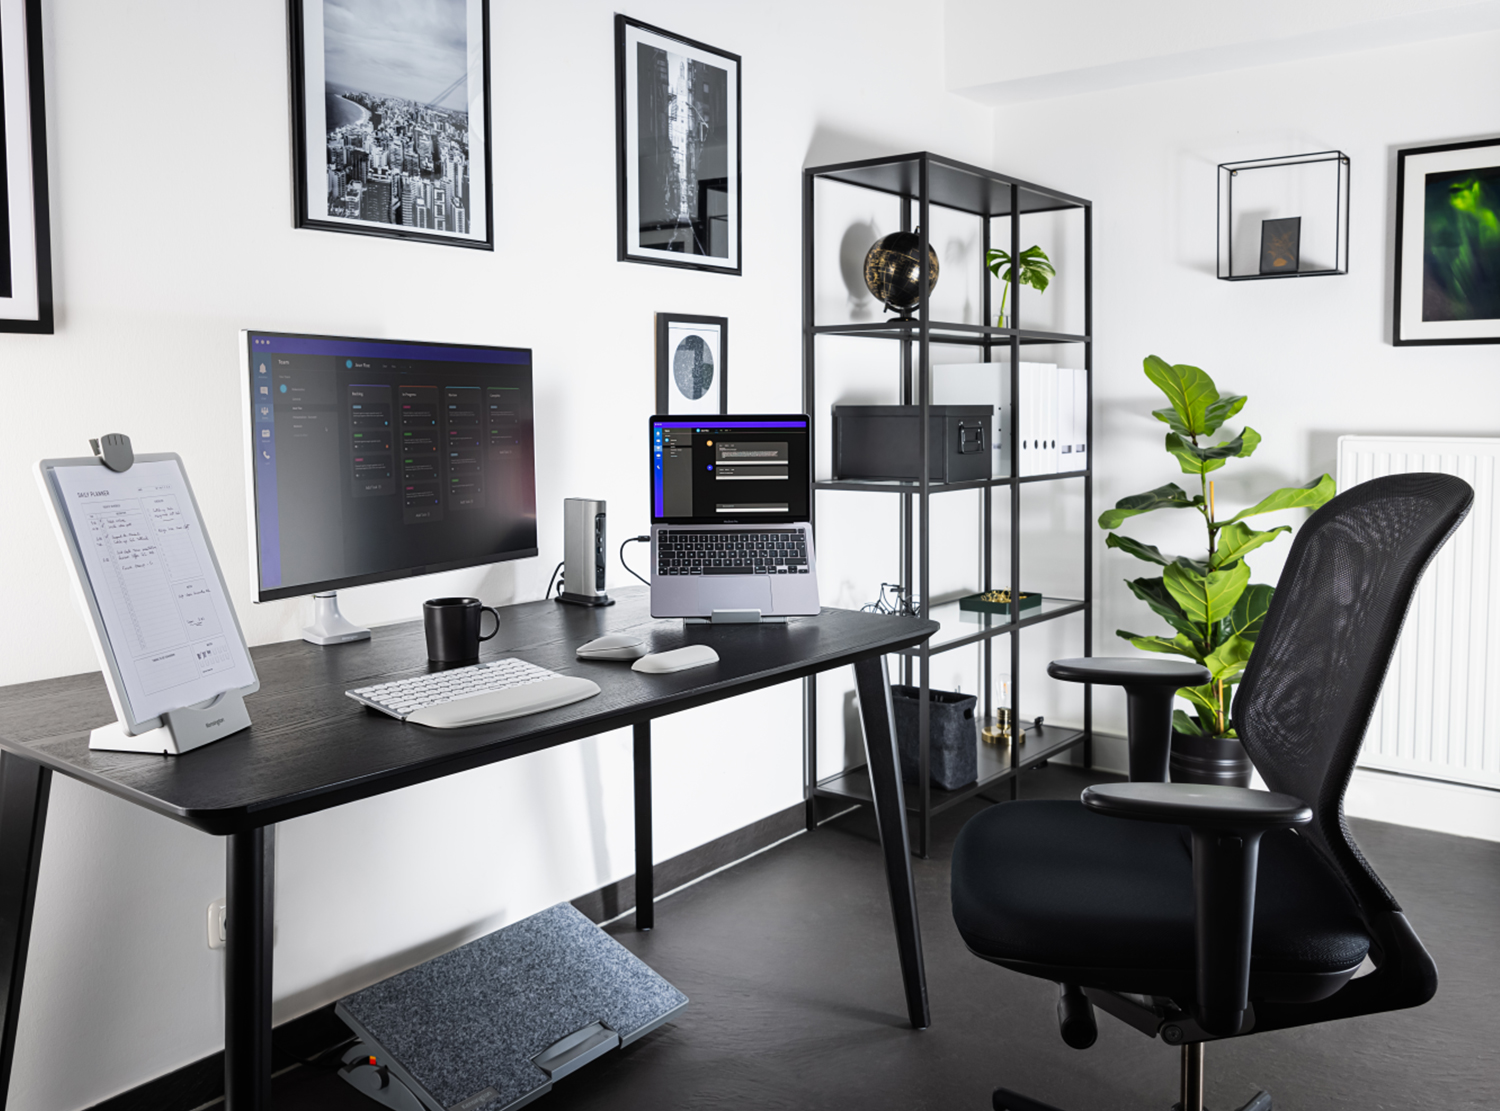 How to Set Up an Ergonomic Home Office